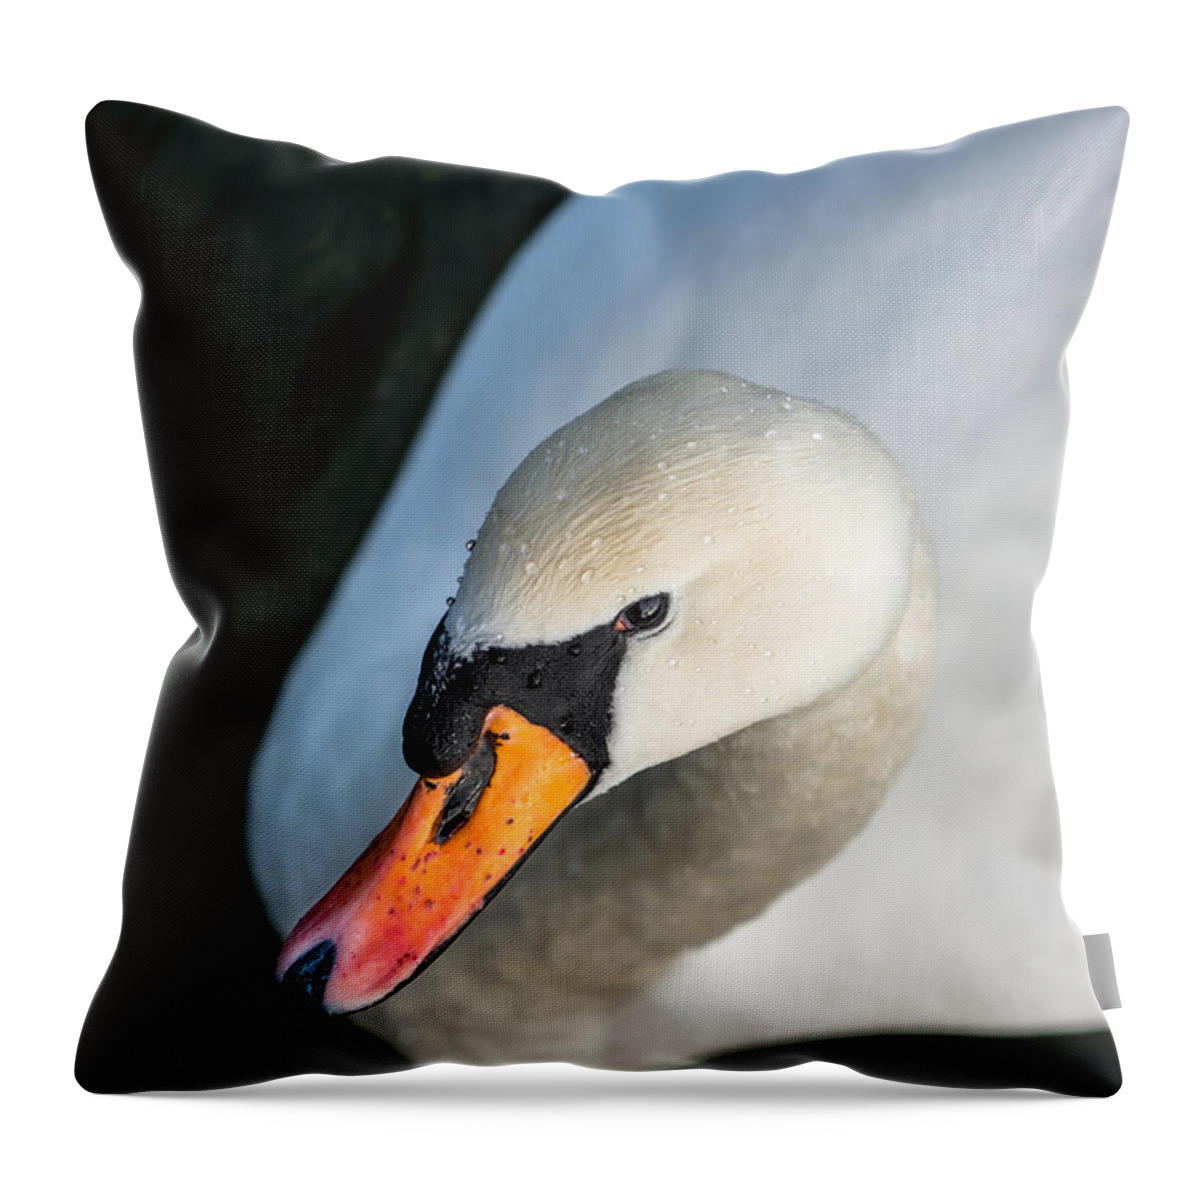 Swan Throw Pillow featuring the photograph Elegant Swan by Andreas Berthold